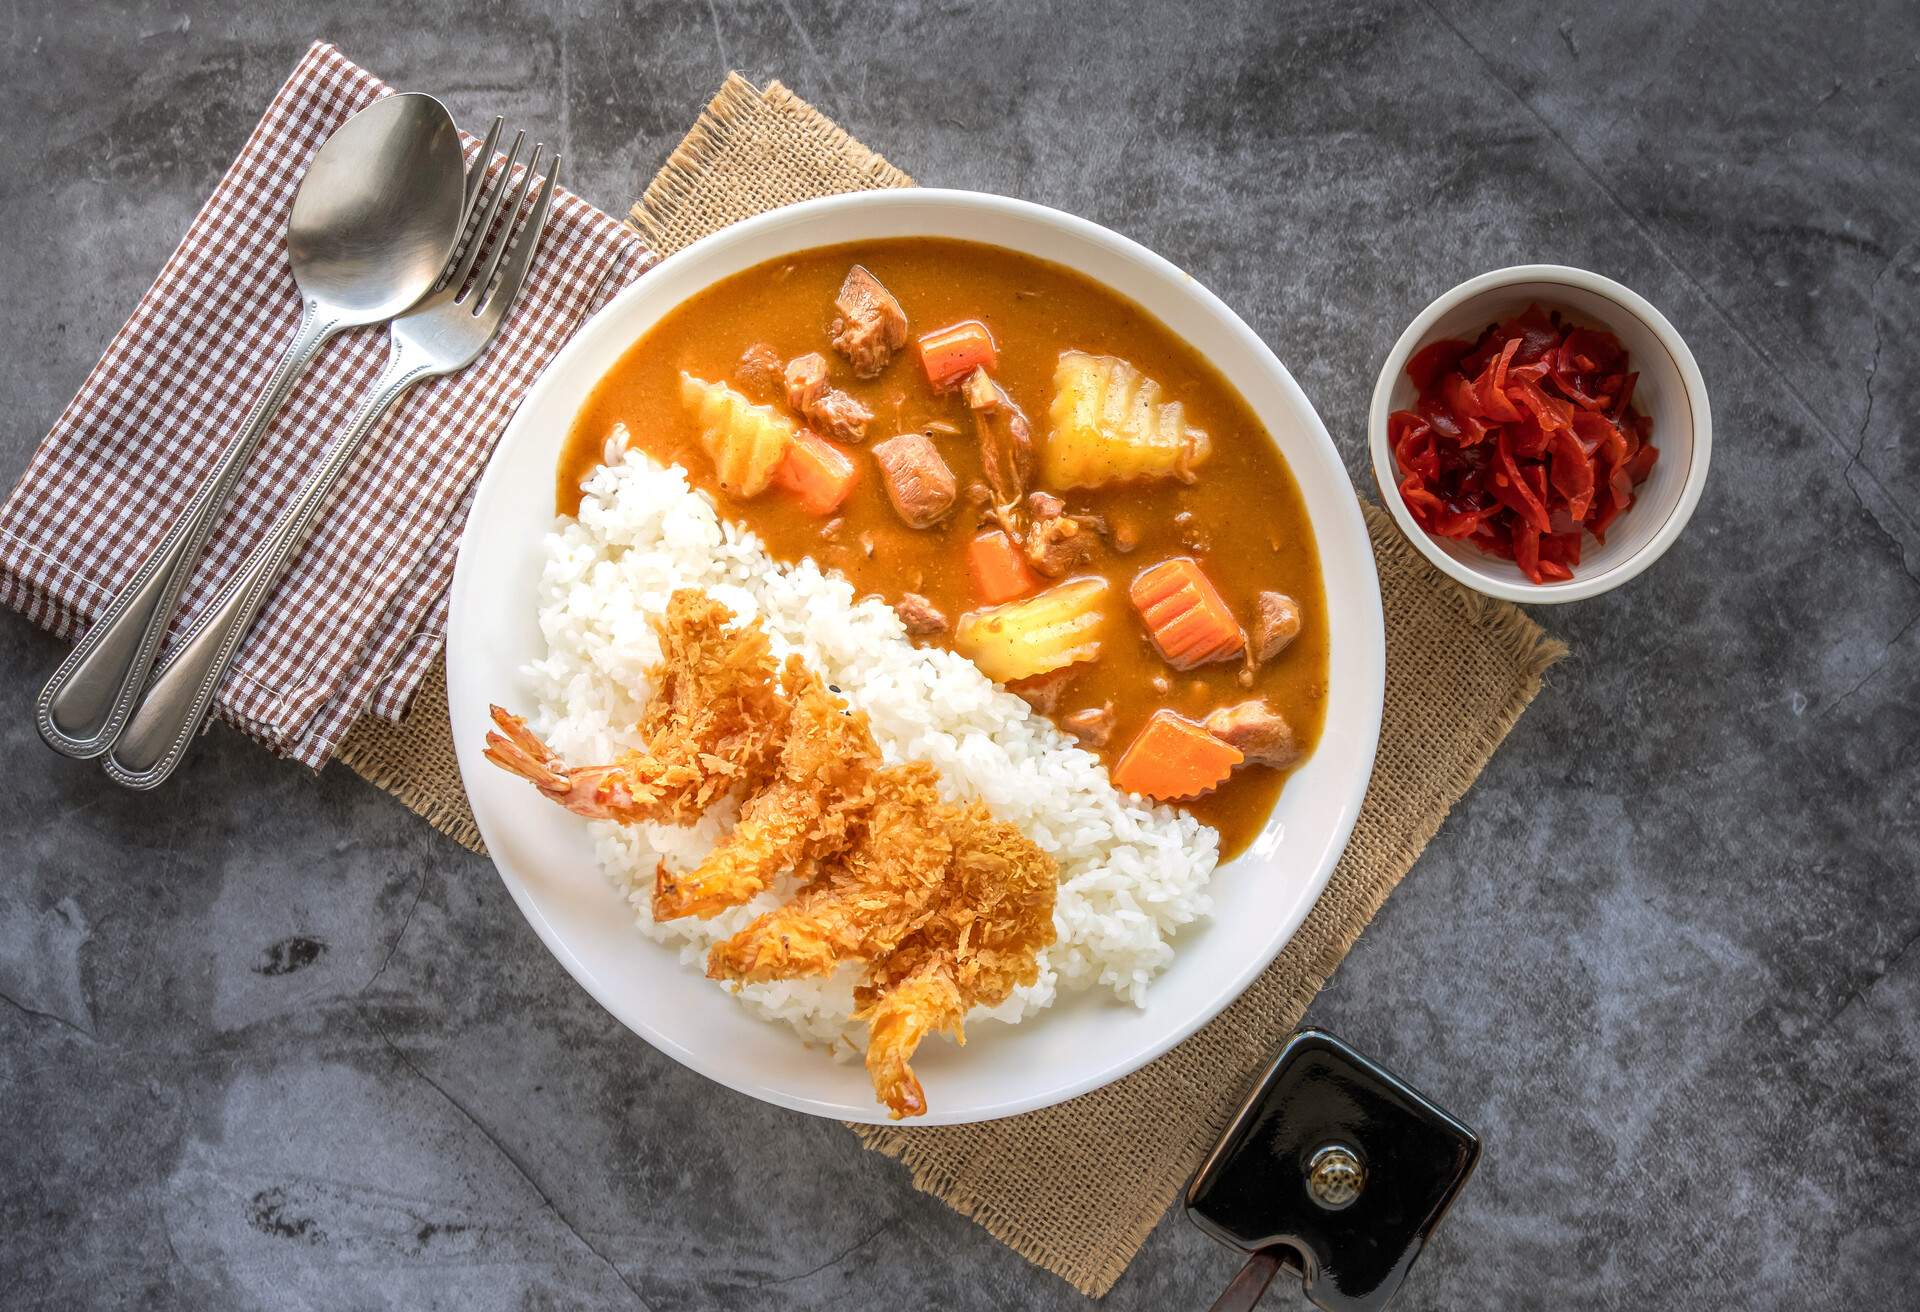 Top View of Japanese Curry rice with fried Shrimp Crispy